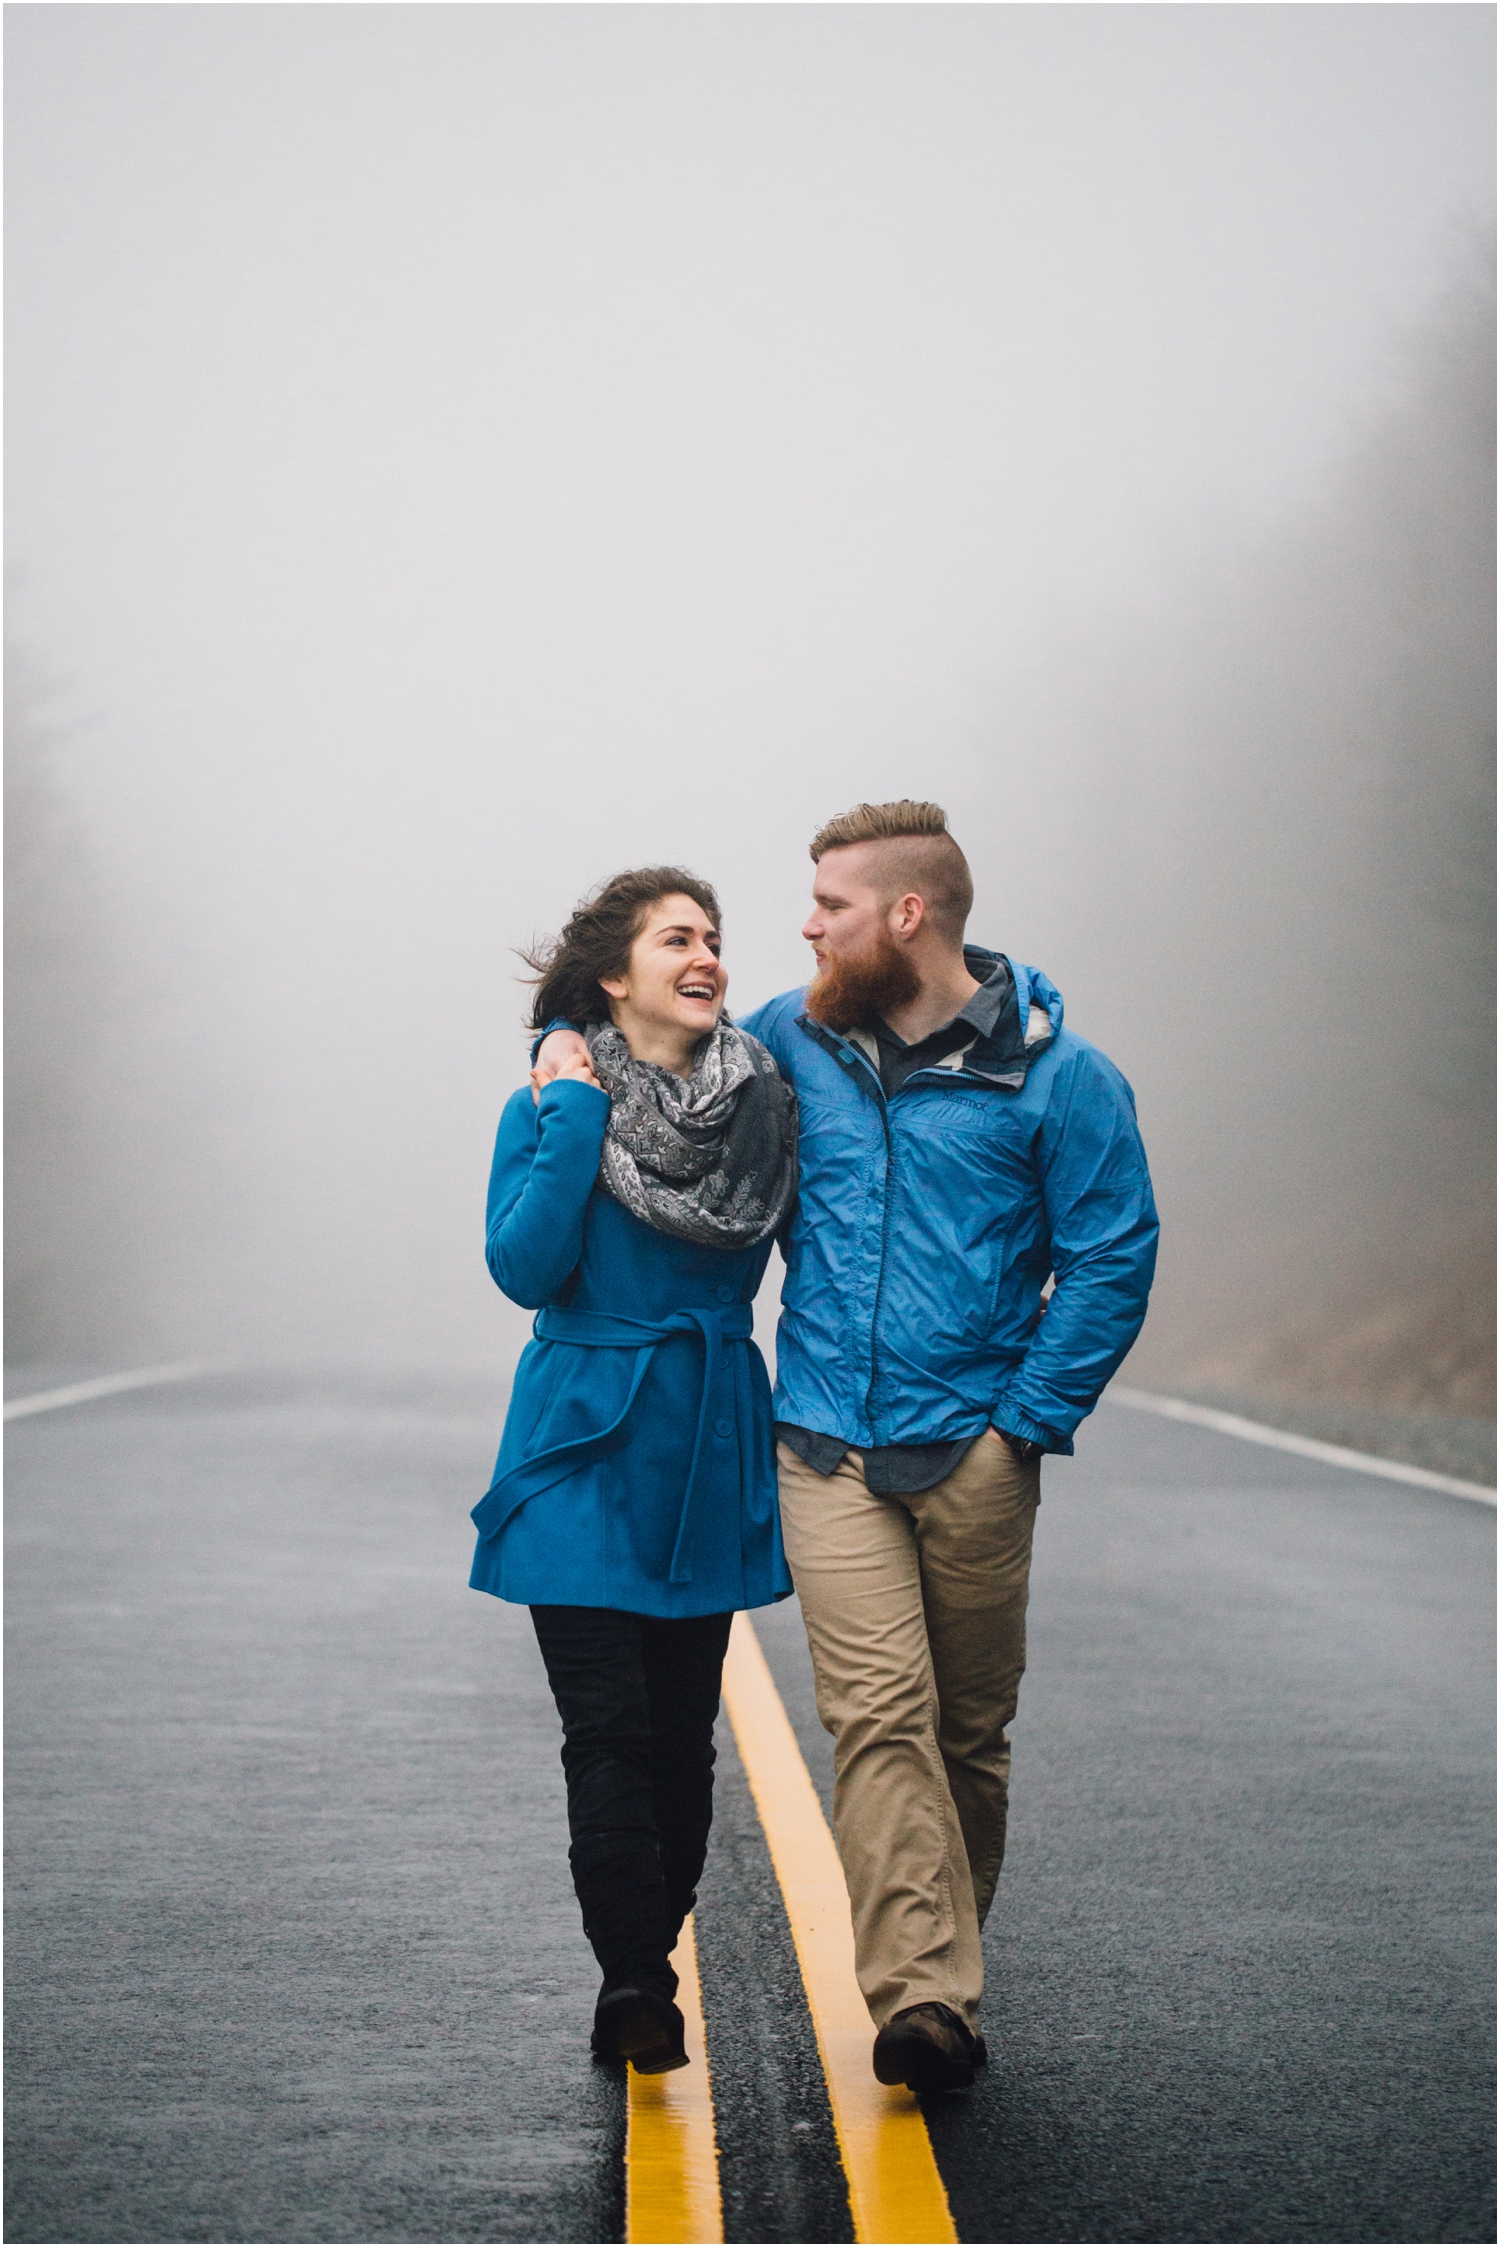 katy-sergent-photography-grayson-highlands-engagement-session-mouth-of-wilson-virginia-damascus-appalachian-trail-tennessee-wedding-elopement_0029.jpg